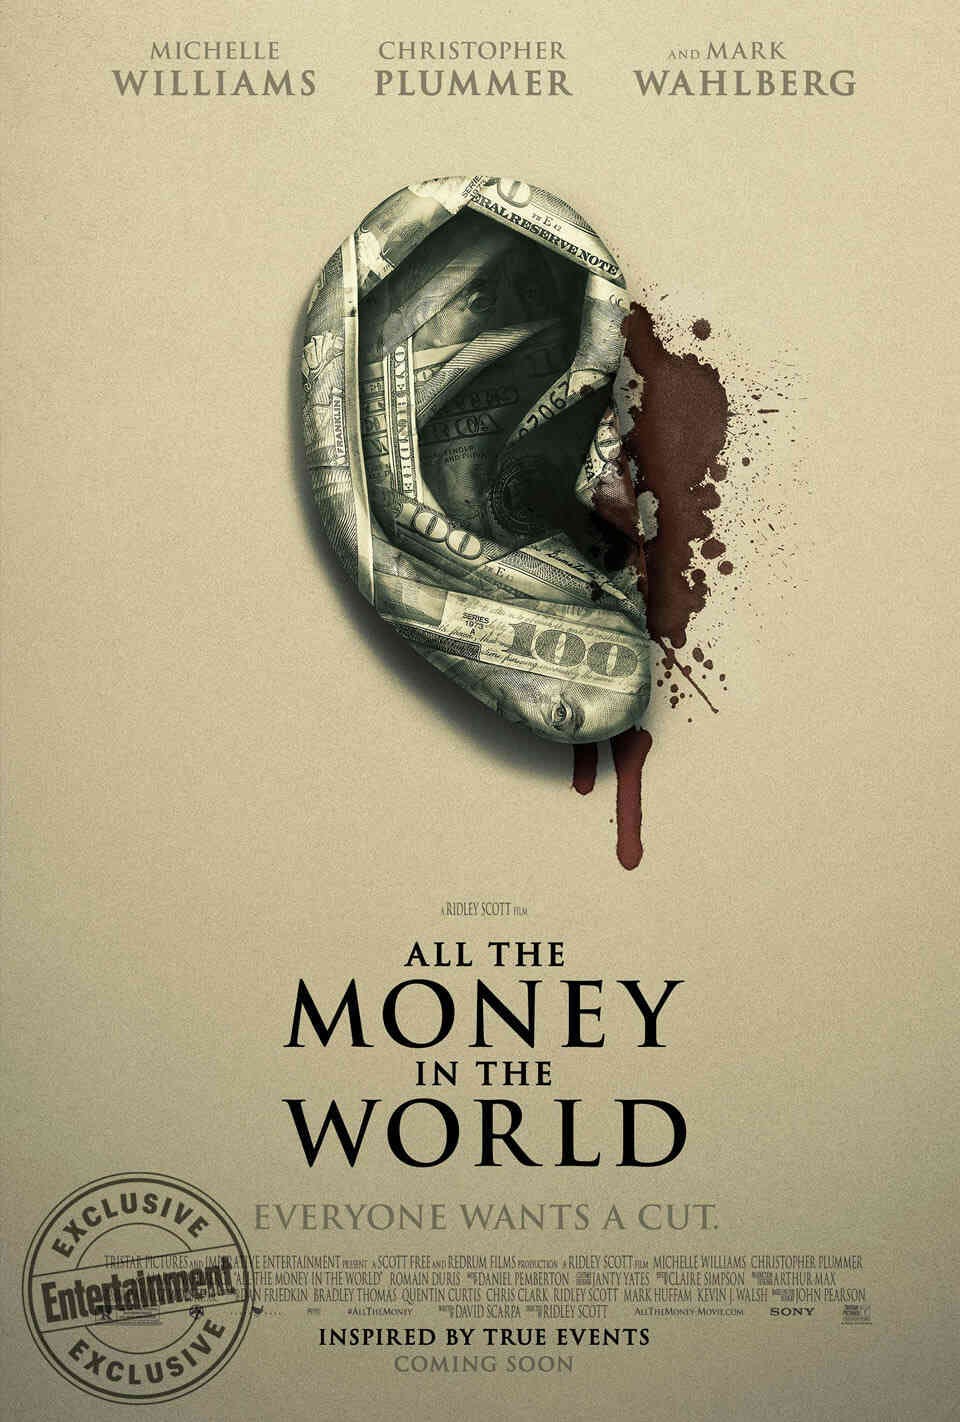 Read All the Money in the World screenplay (poster)